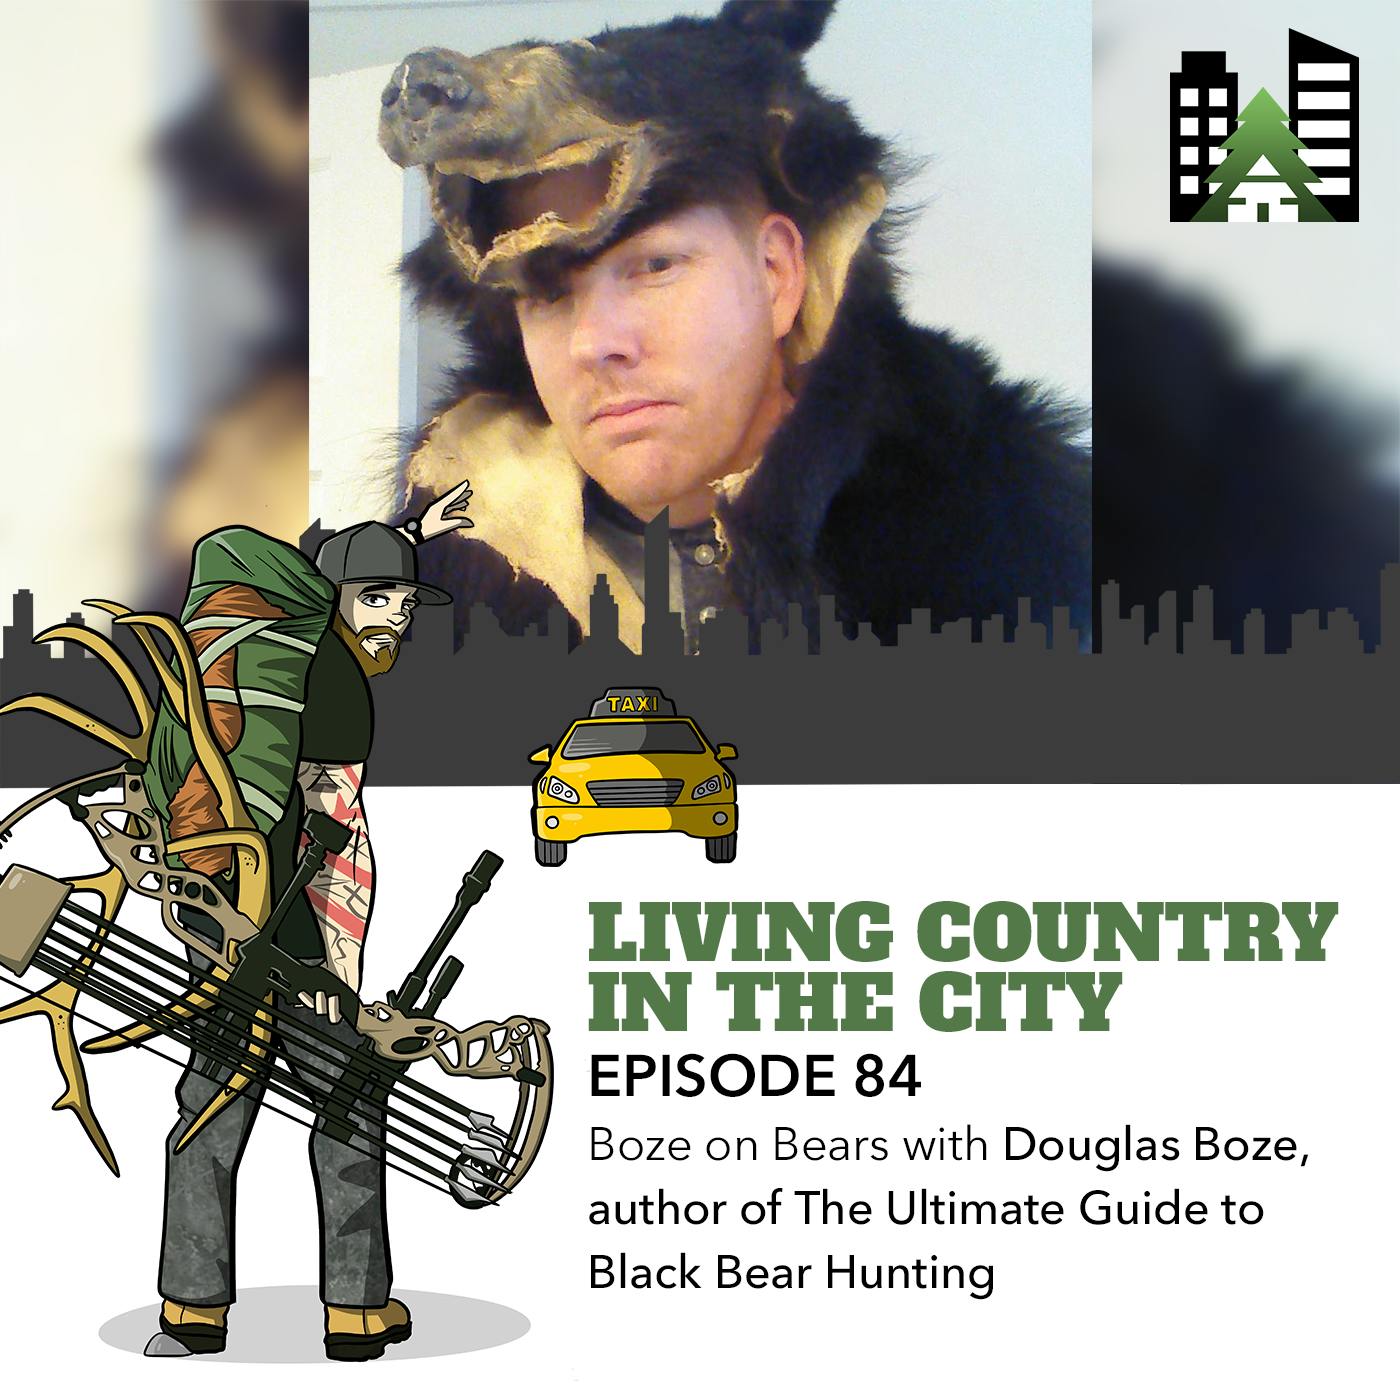 Ep 84 - Boze on Bears with Douglas Boze, author of The Ultimate Guide to Black Bear Hunting